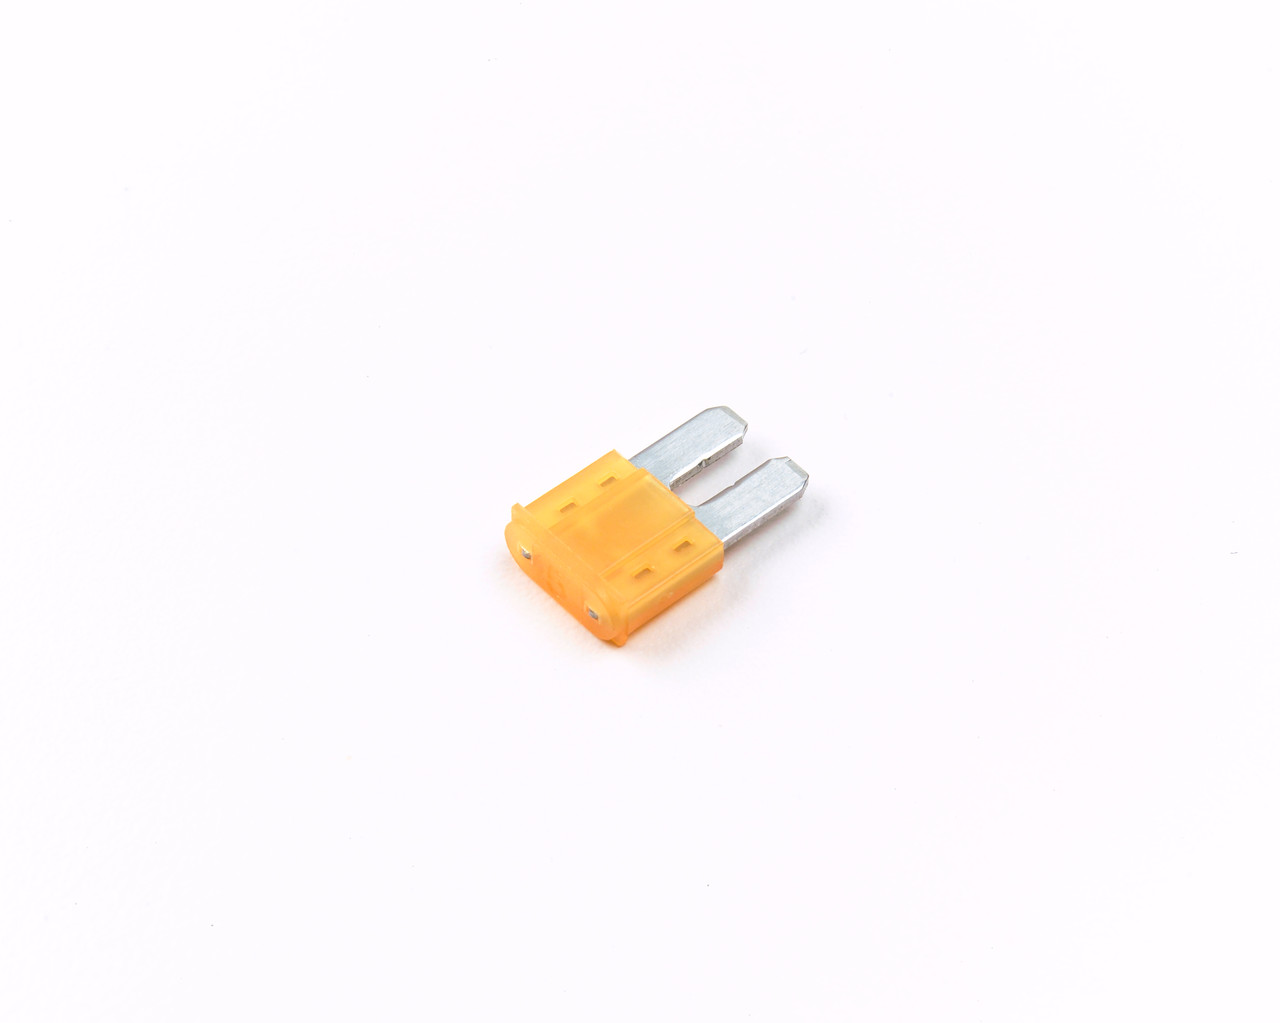 Micro Blade 2-Blade Fuse 5A 32V @ 5 Pack - Tan  82-ANT-5A